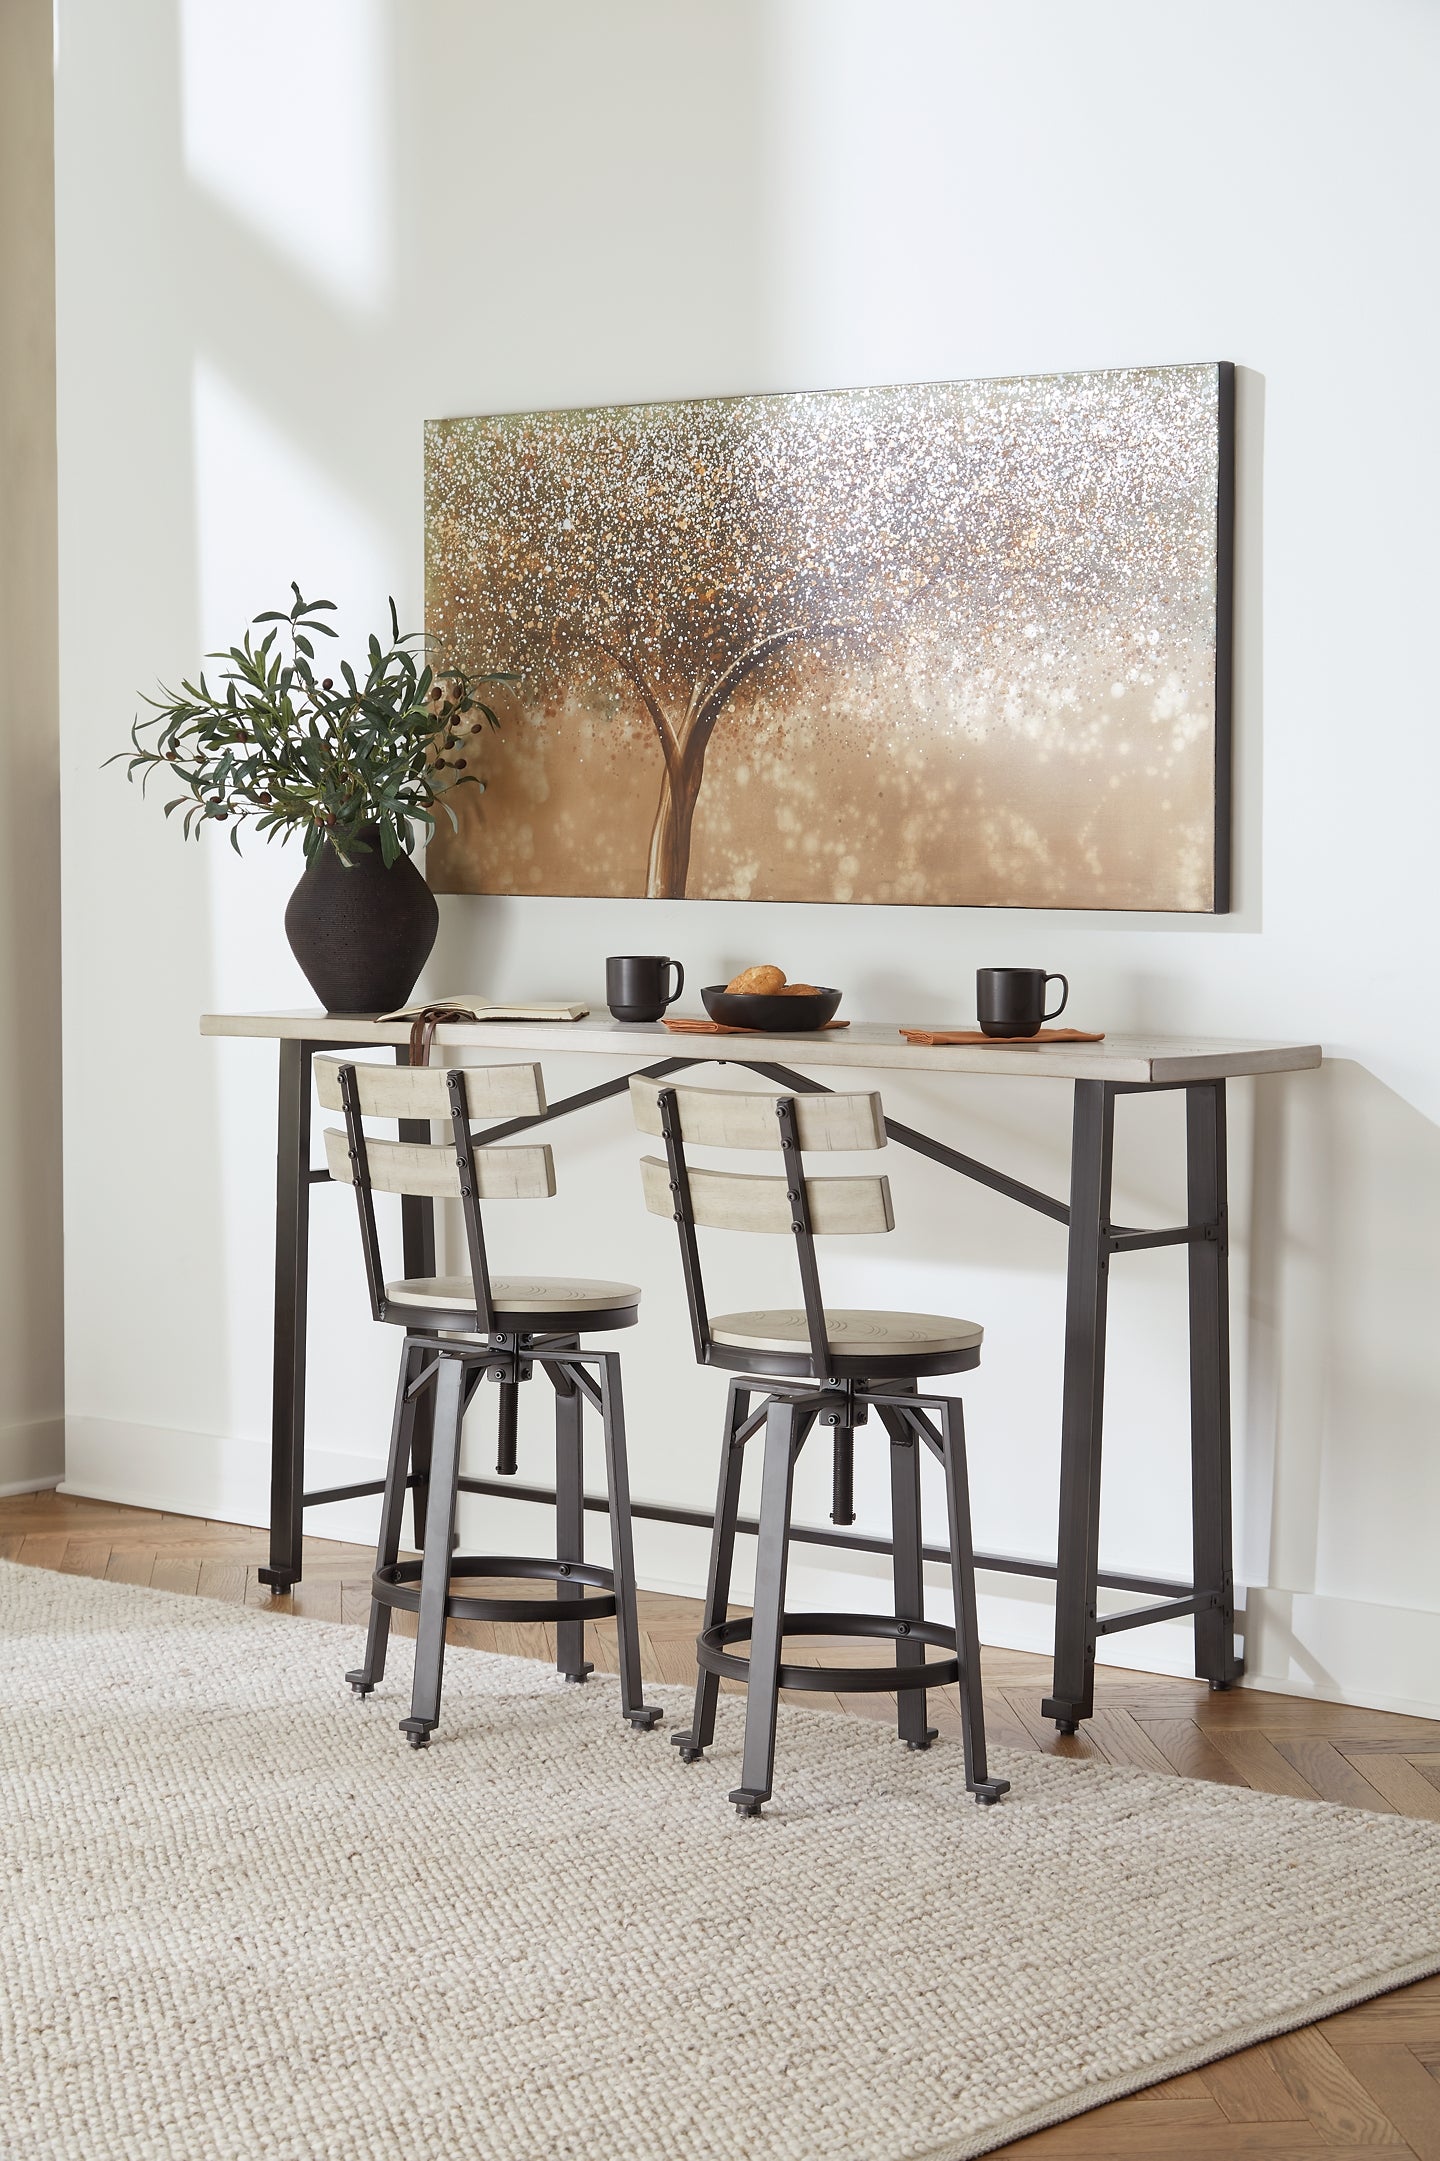 Karisslyn Counter Height Dining Table and 2 Barstools Wilson Furniture (OH)  in Bridgeport, Ohio. Serving Bridgeport, Yorkville, Bellaire, & Avondale